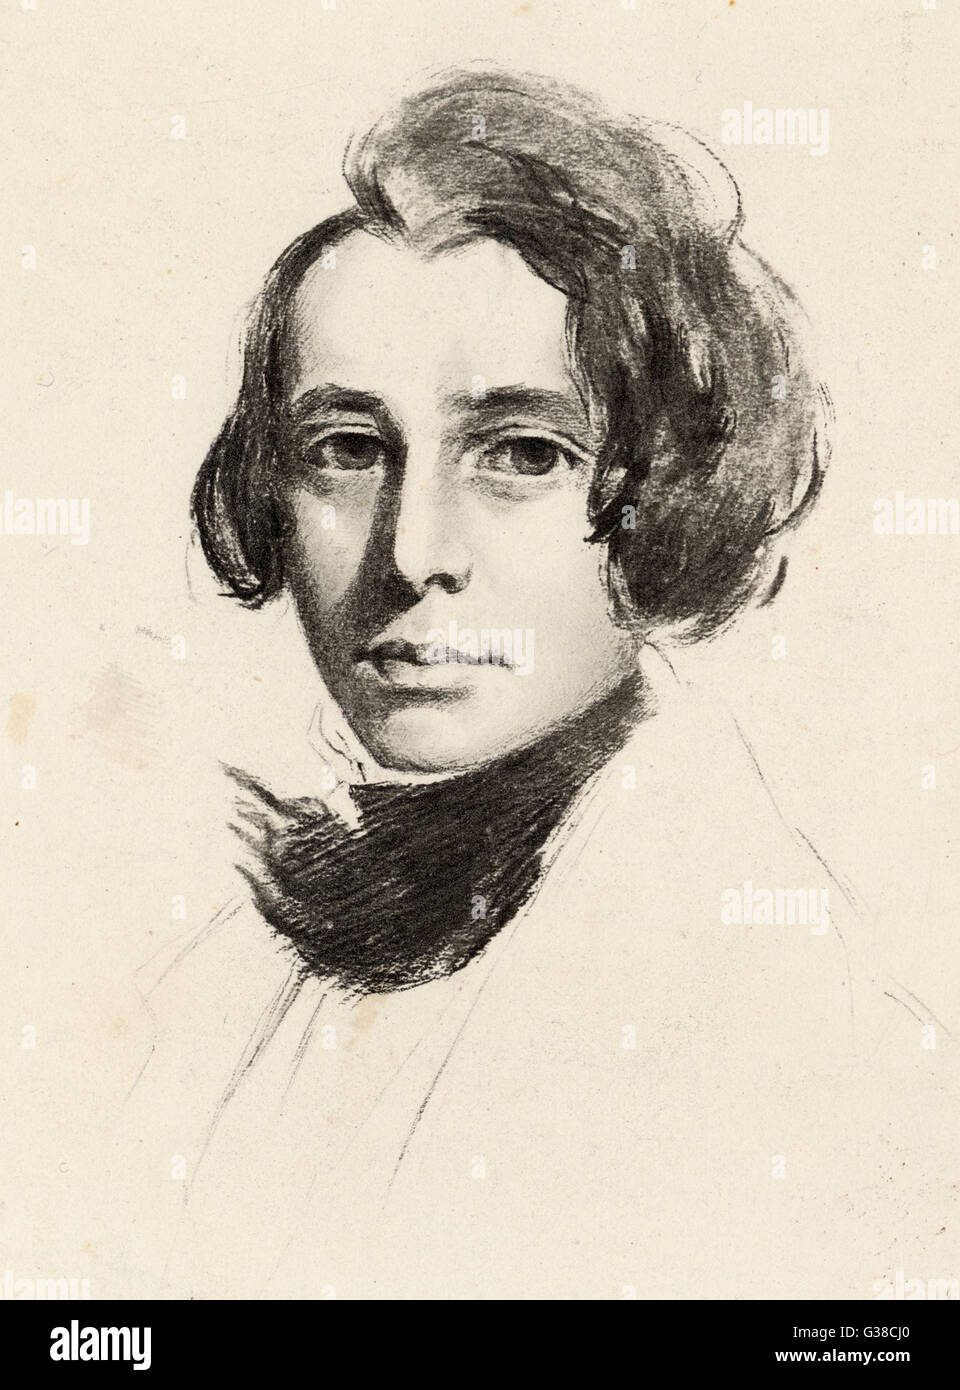 Learn to Draw Charles Dickens